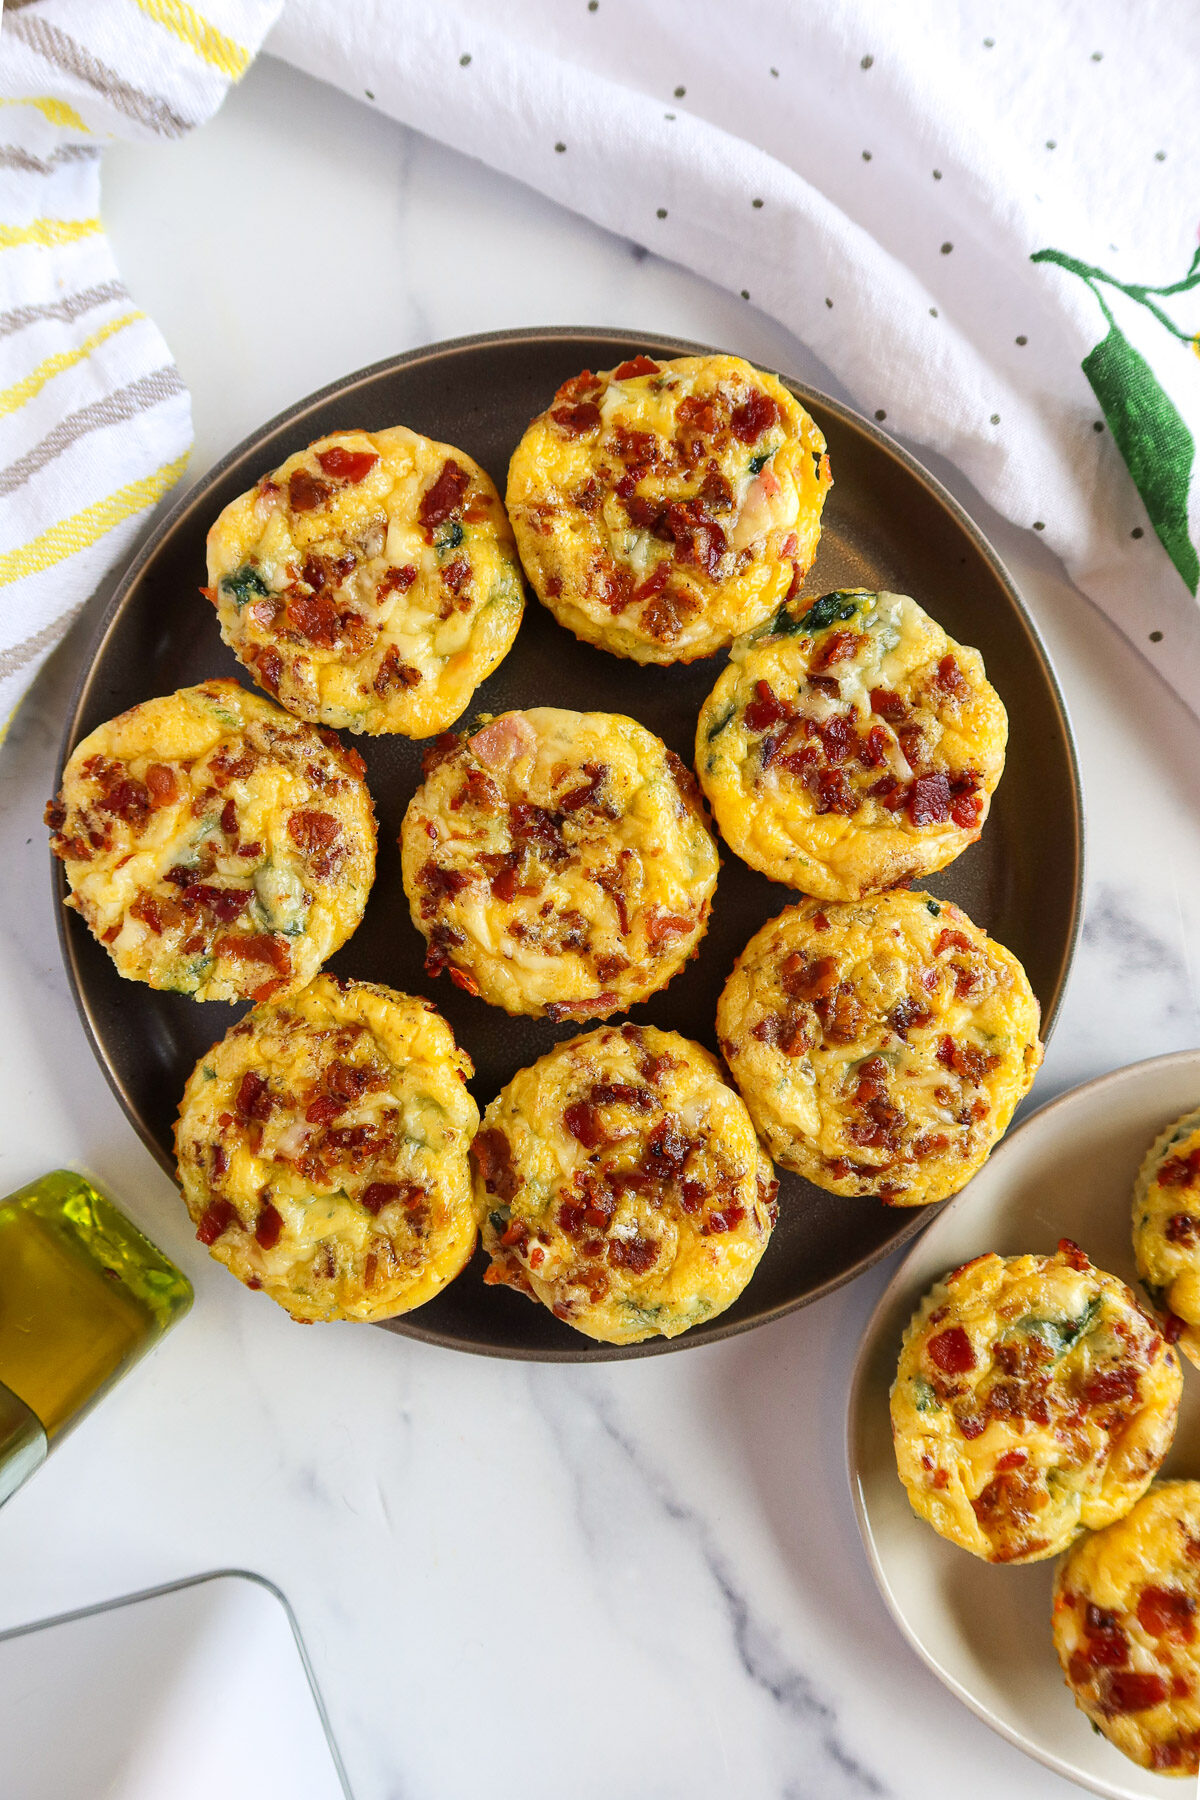 Ham and cheese quiche cups on gray and white plates.